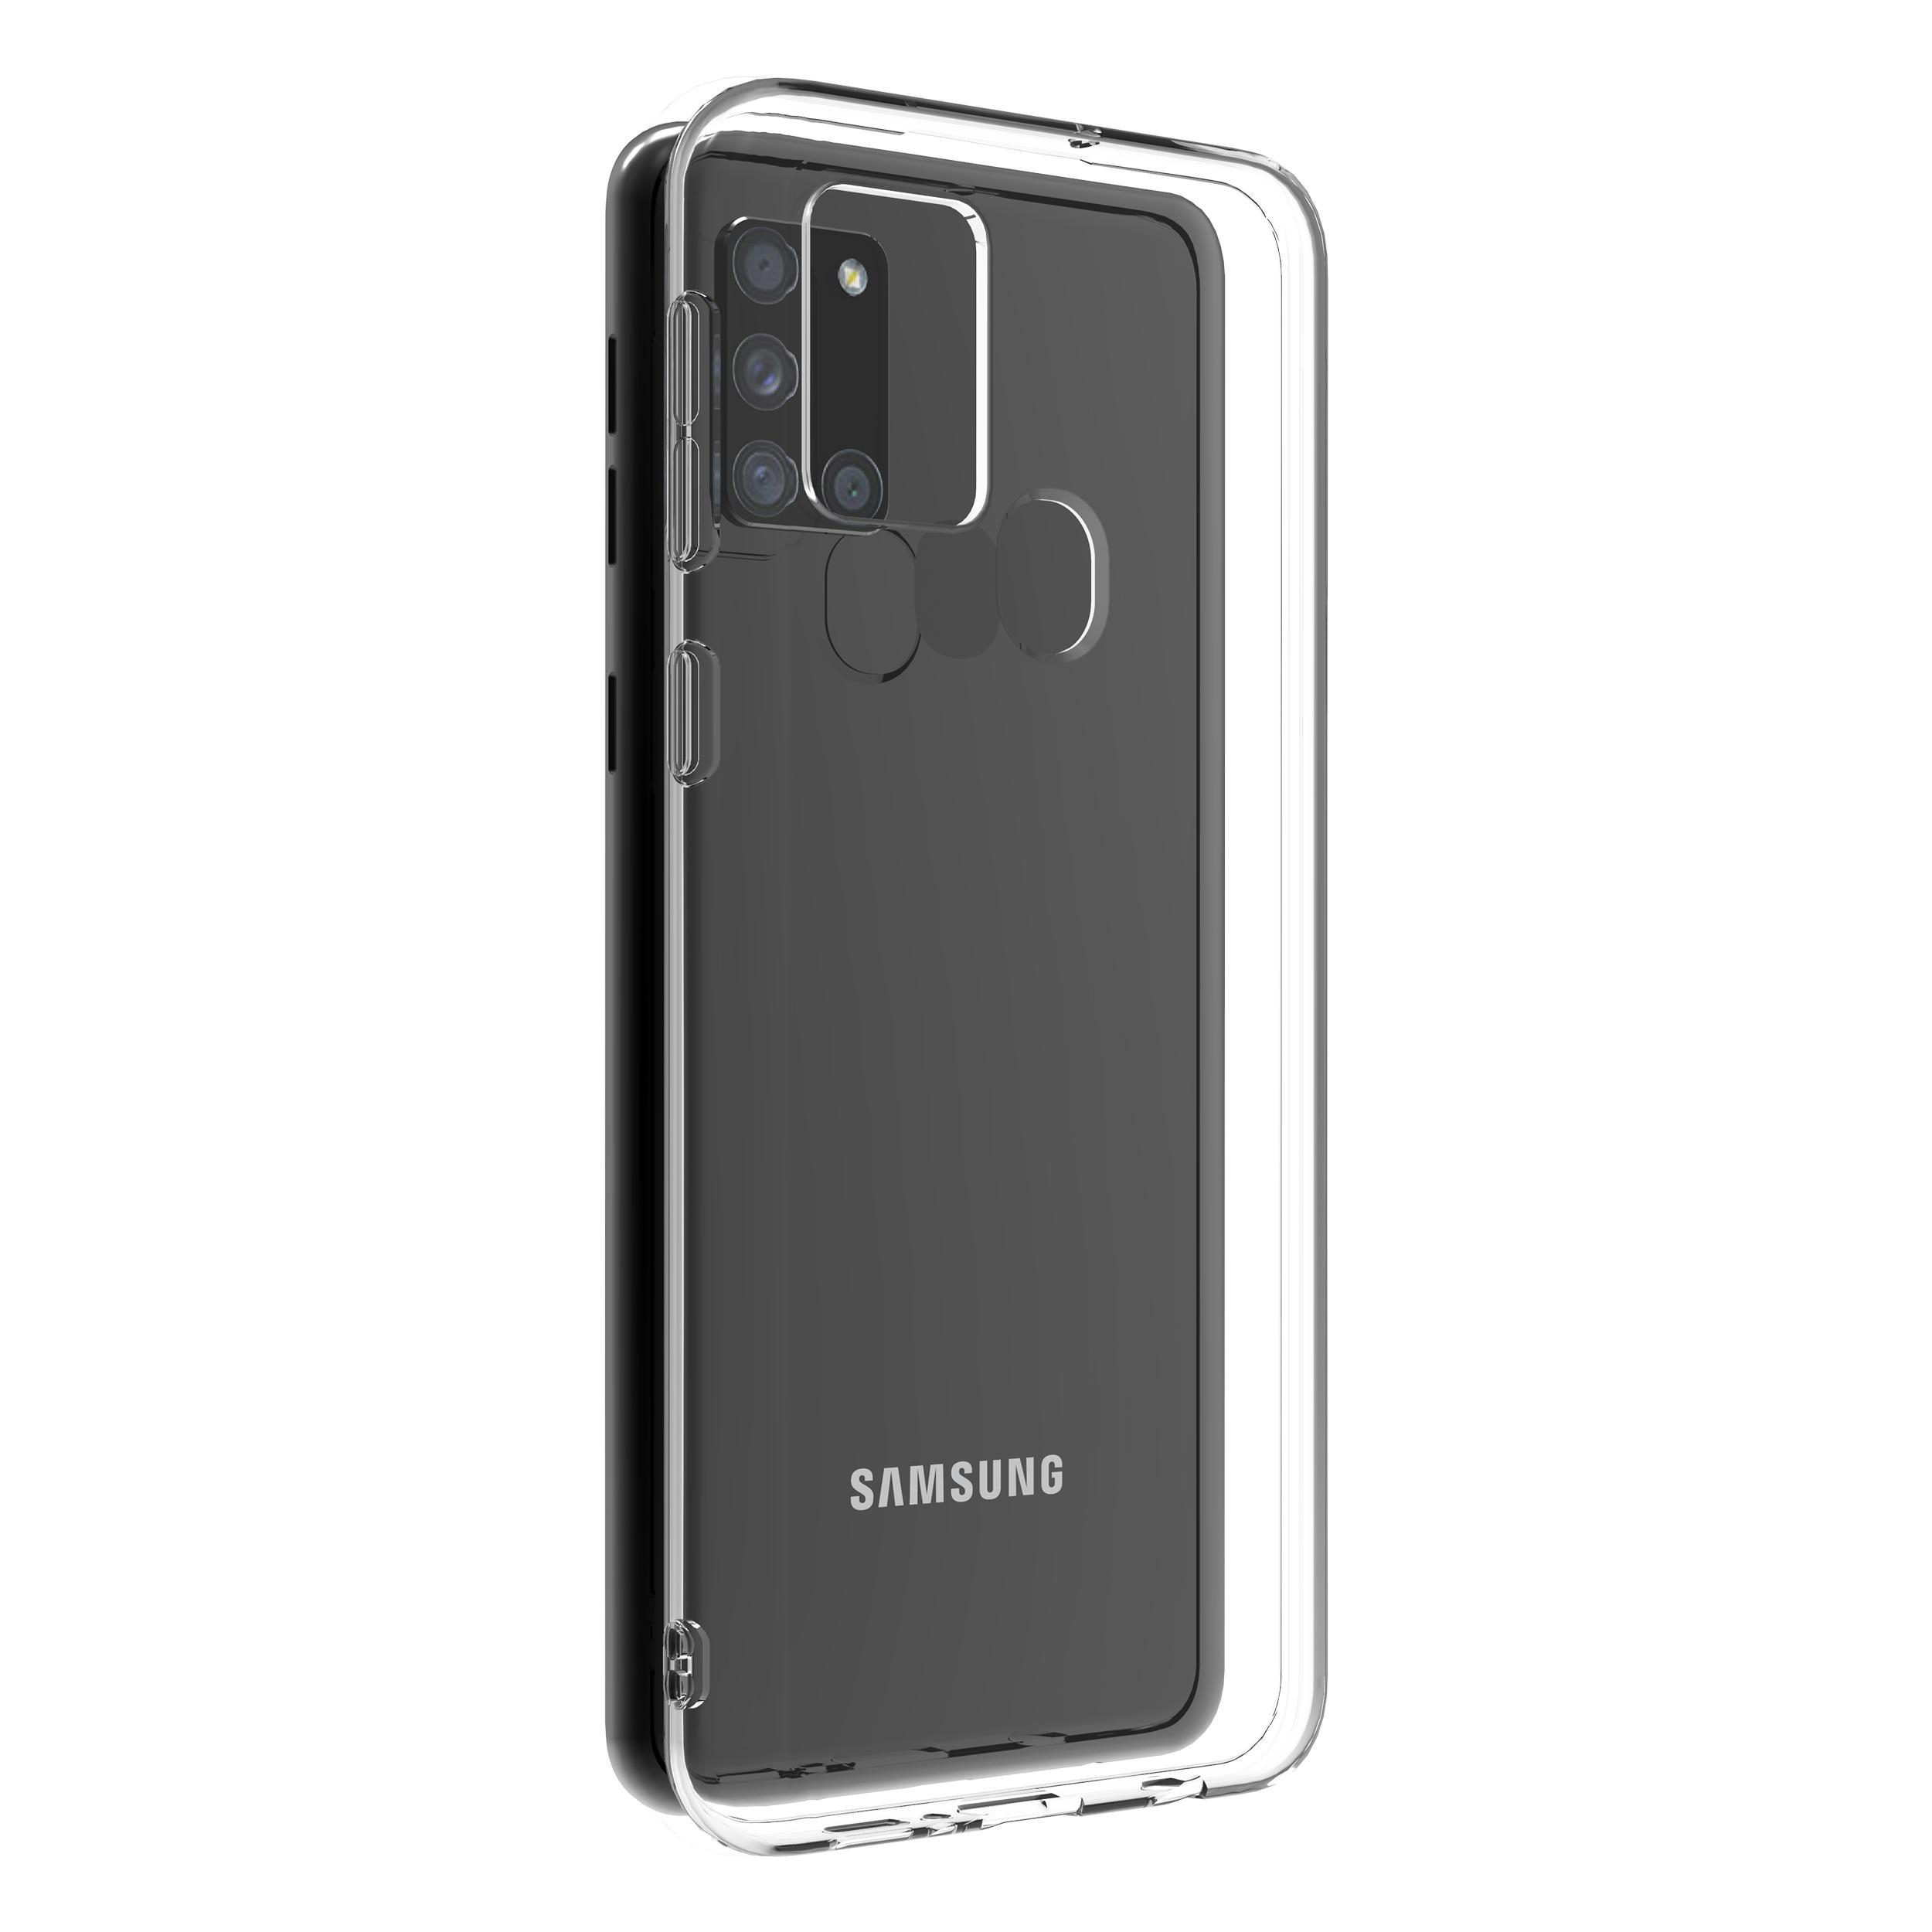 ISY ISC-5002, Backcover, Samsung, Transparent Galaxy A21S